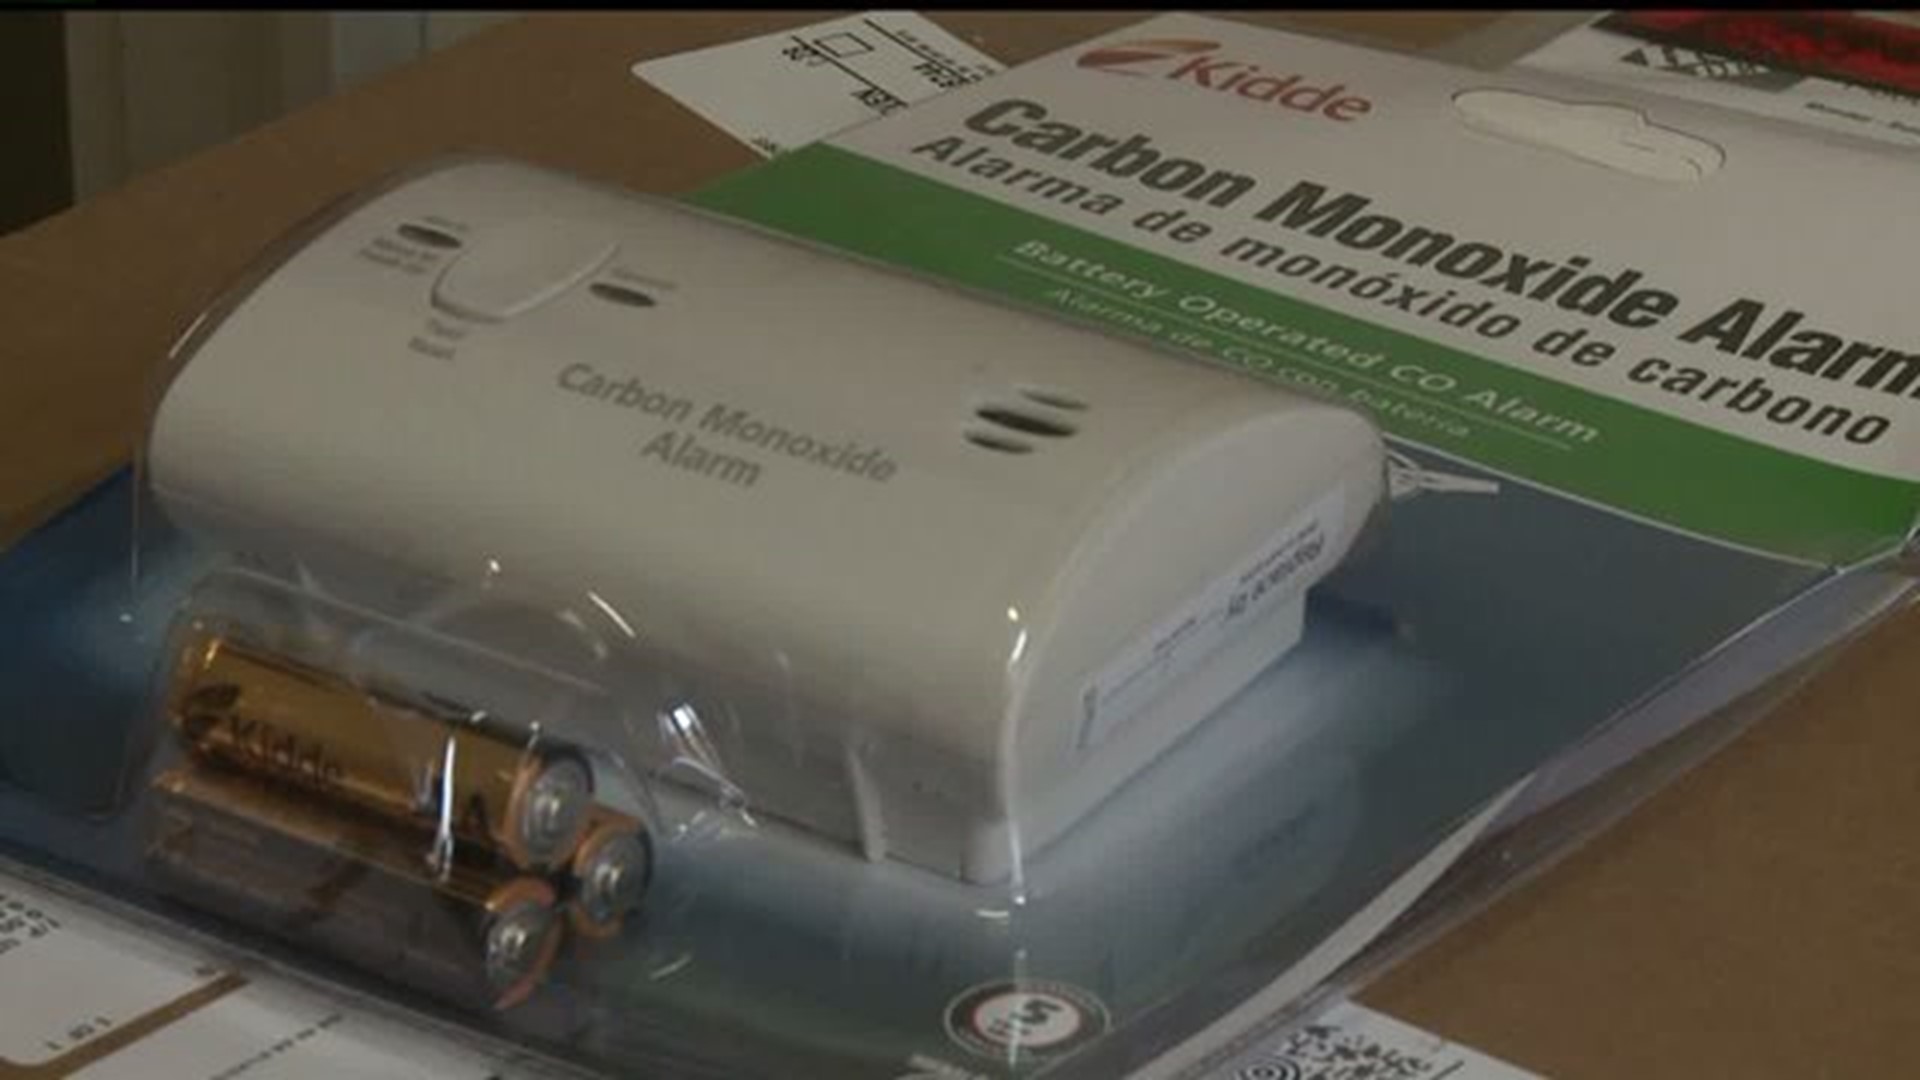 Carbon Monoxide detectors could soon be mandatory in some York City homes